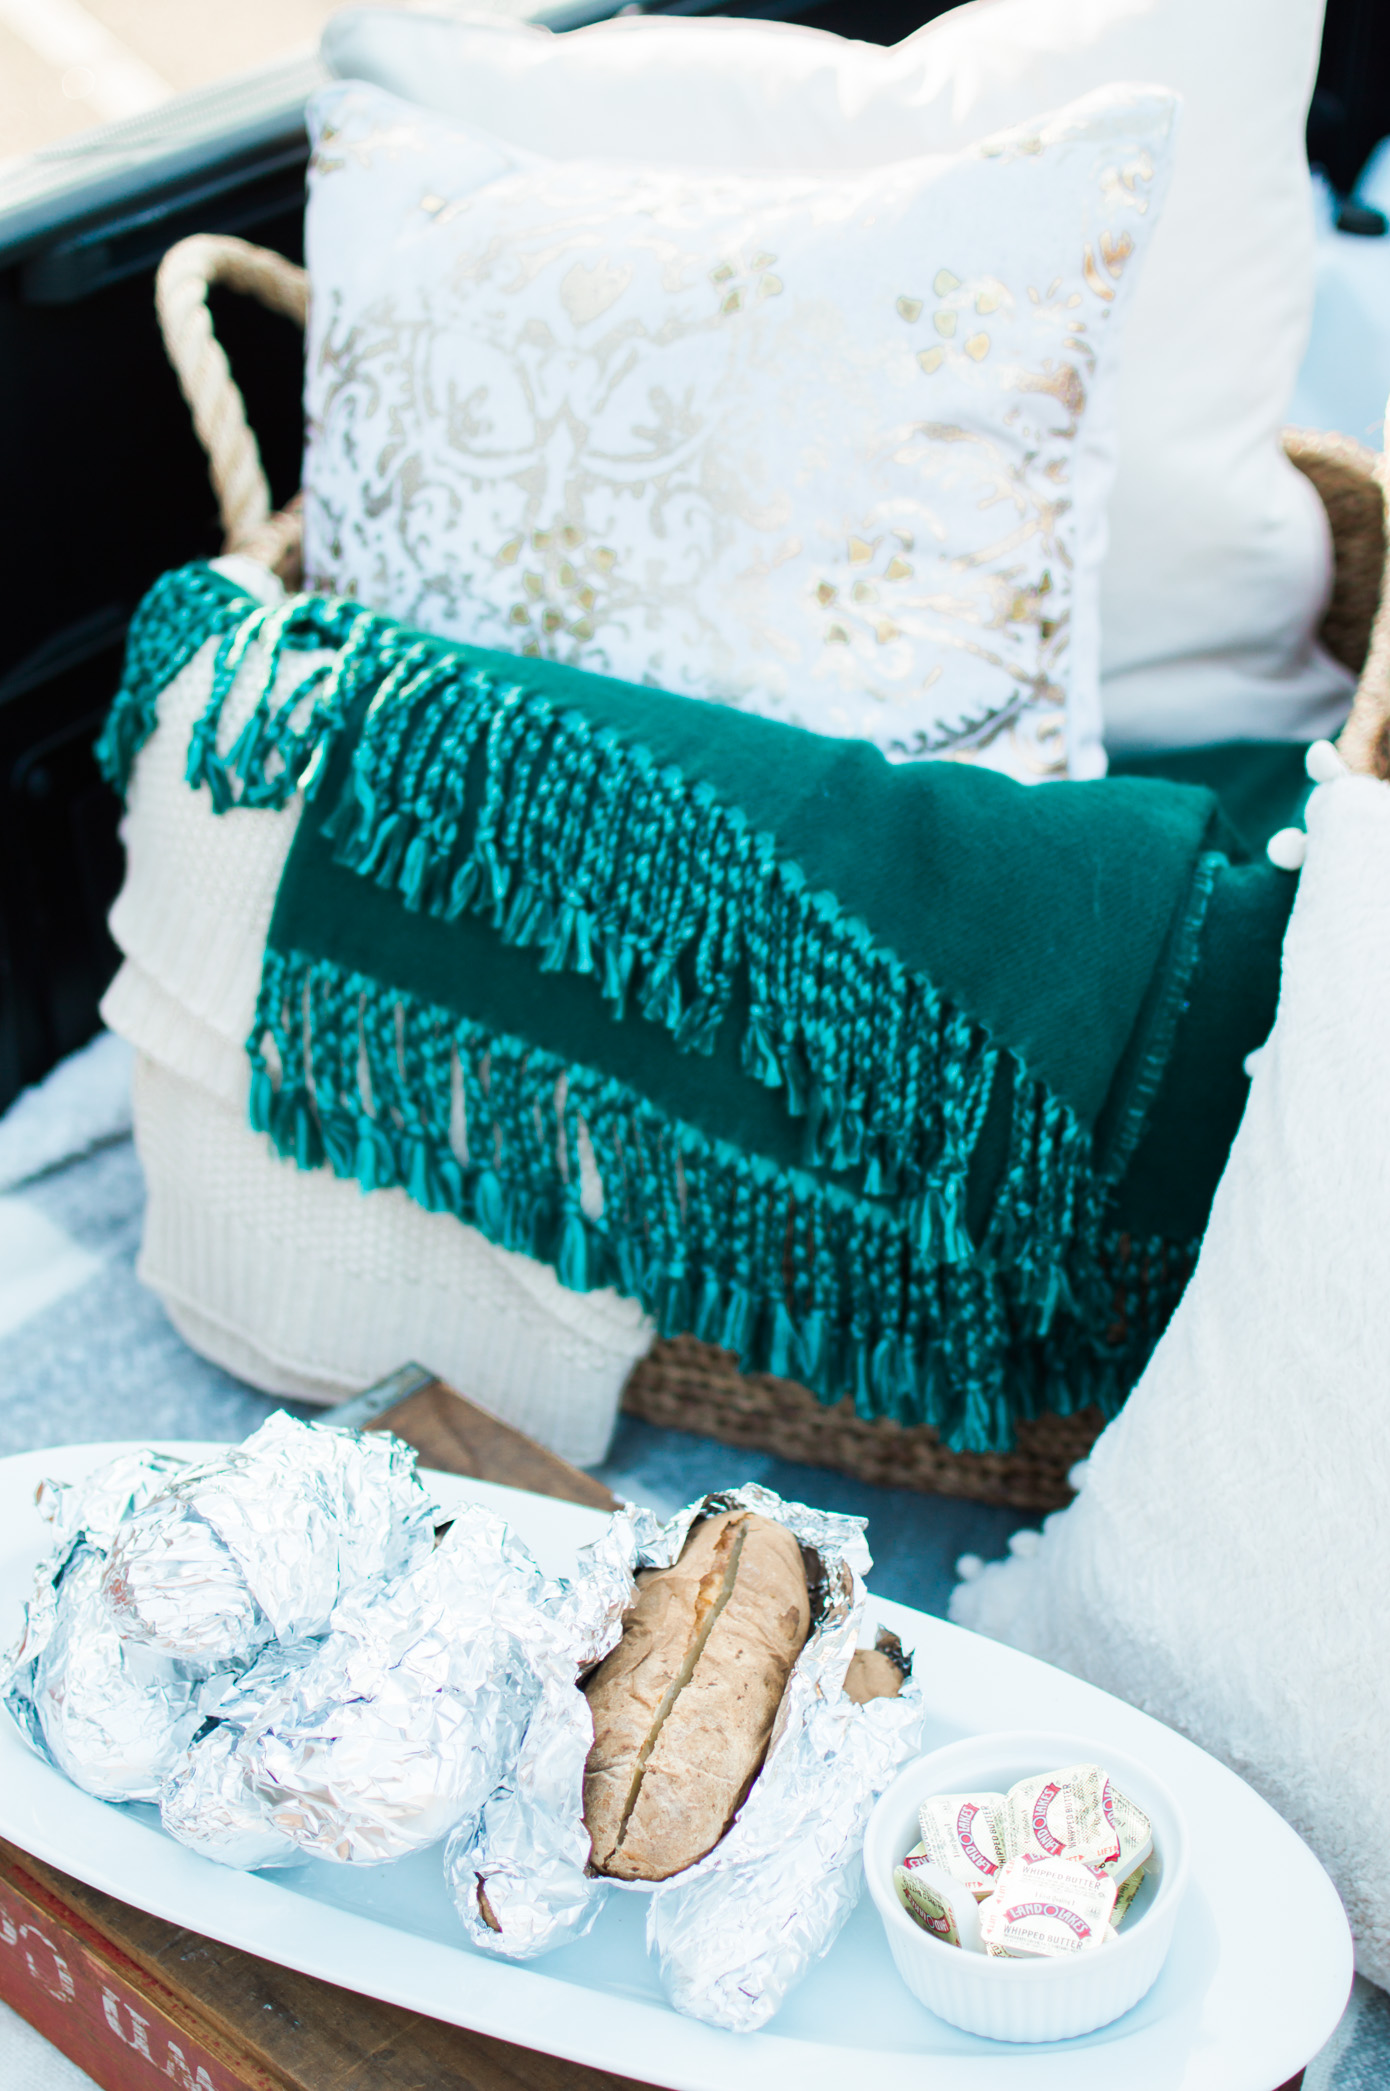 How to Throw a Tailgate Party | Cozy Chic Tailgate | Louella Reese Life & Style Blog